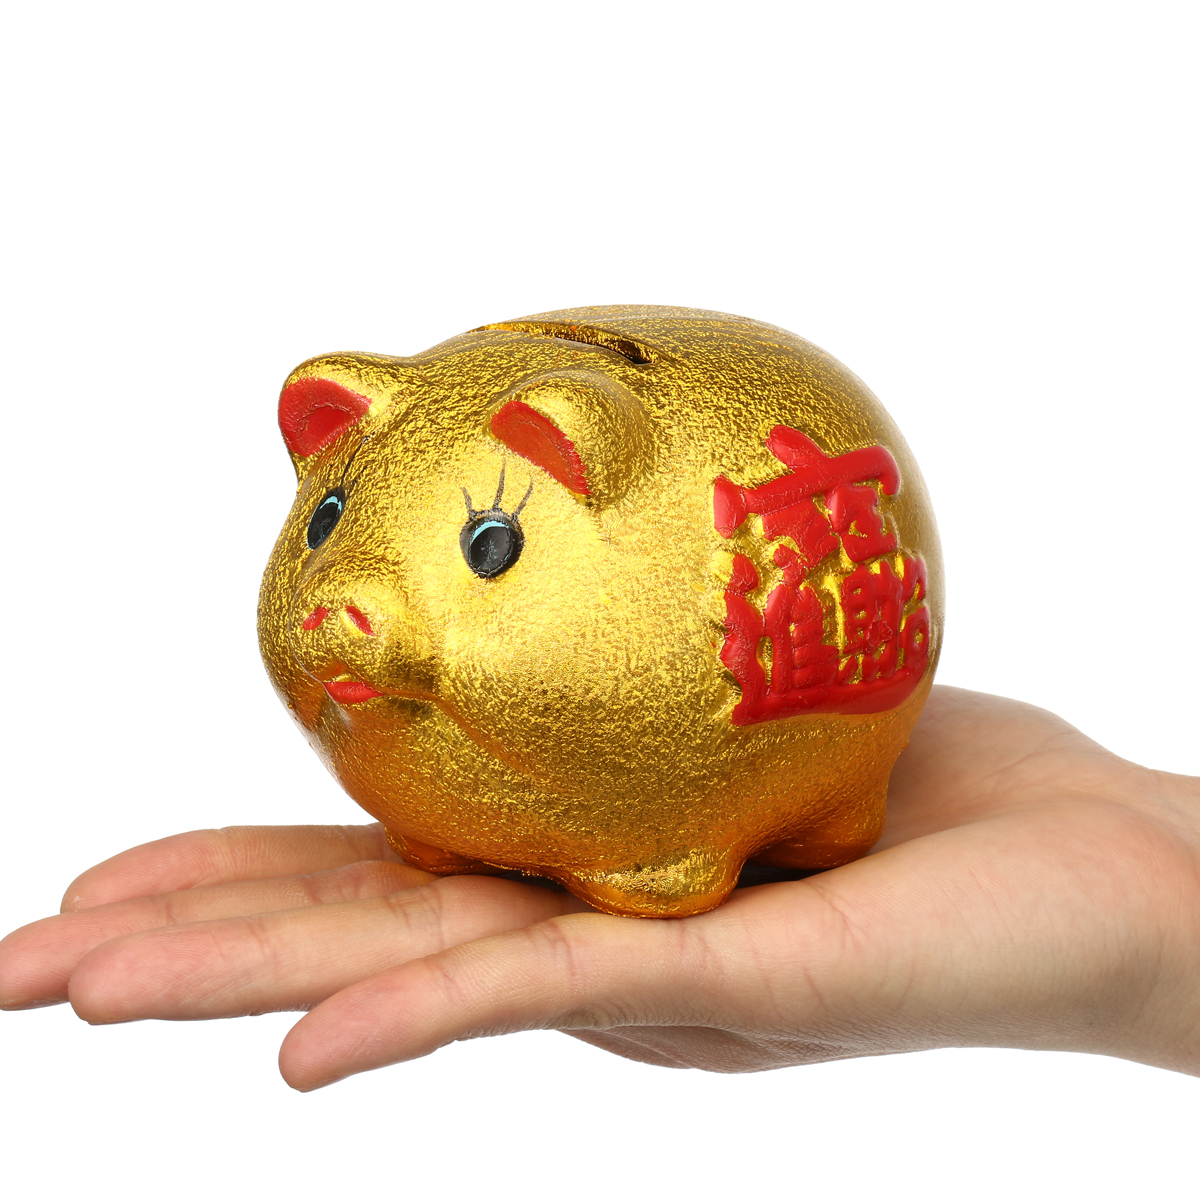 5-Gold-Ceramic-Piggy-Bank-Mini-Cute-Pig-Children-Coin-Collection-Gift-Decorations-1555224-4